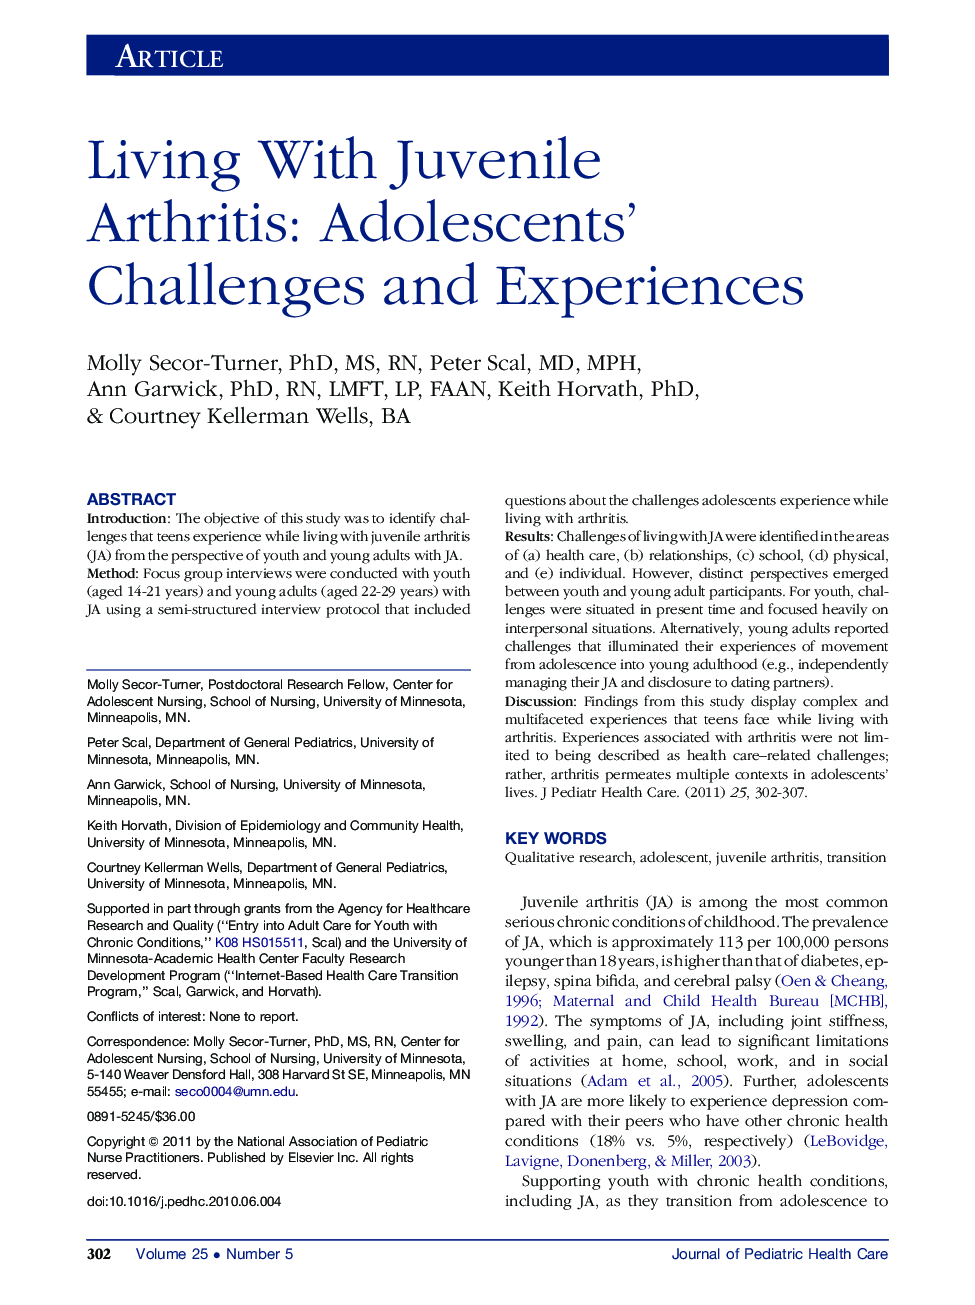 Living With Juvenile Arthritis: Adolescents' Challenges and Experiences 